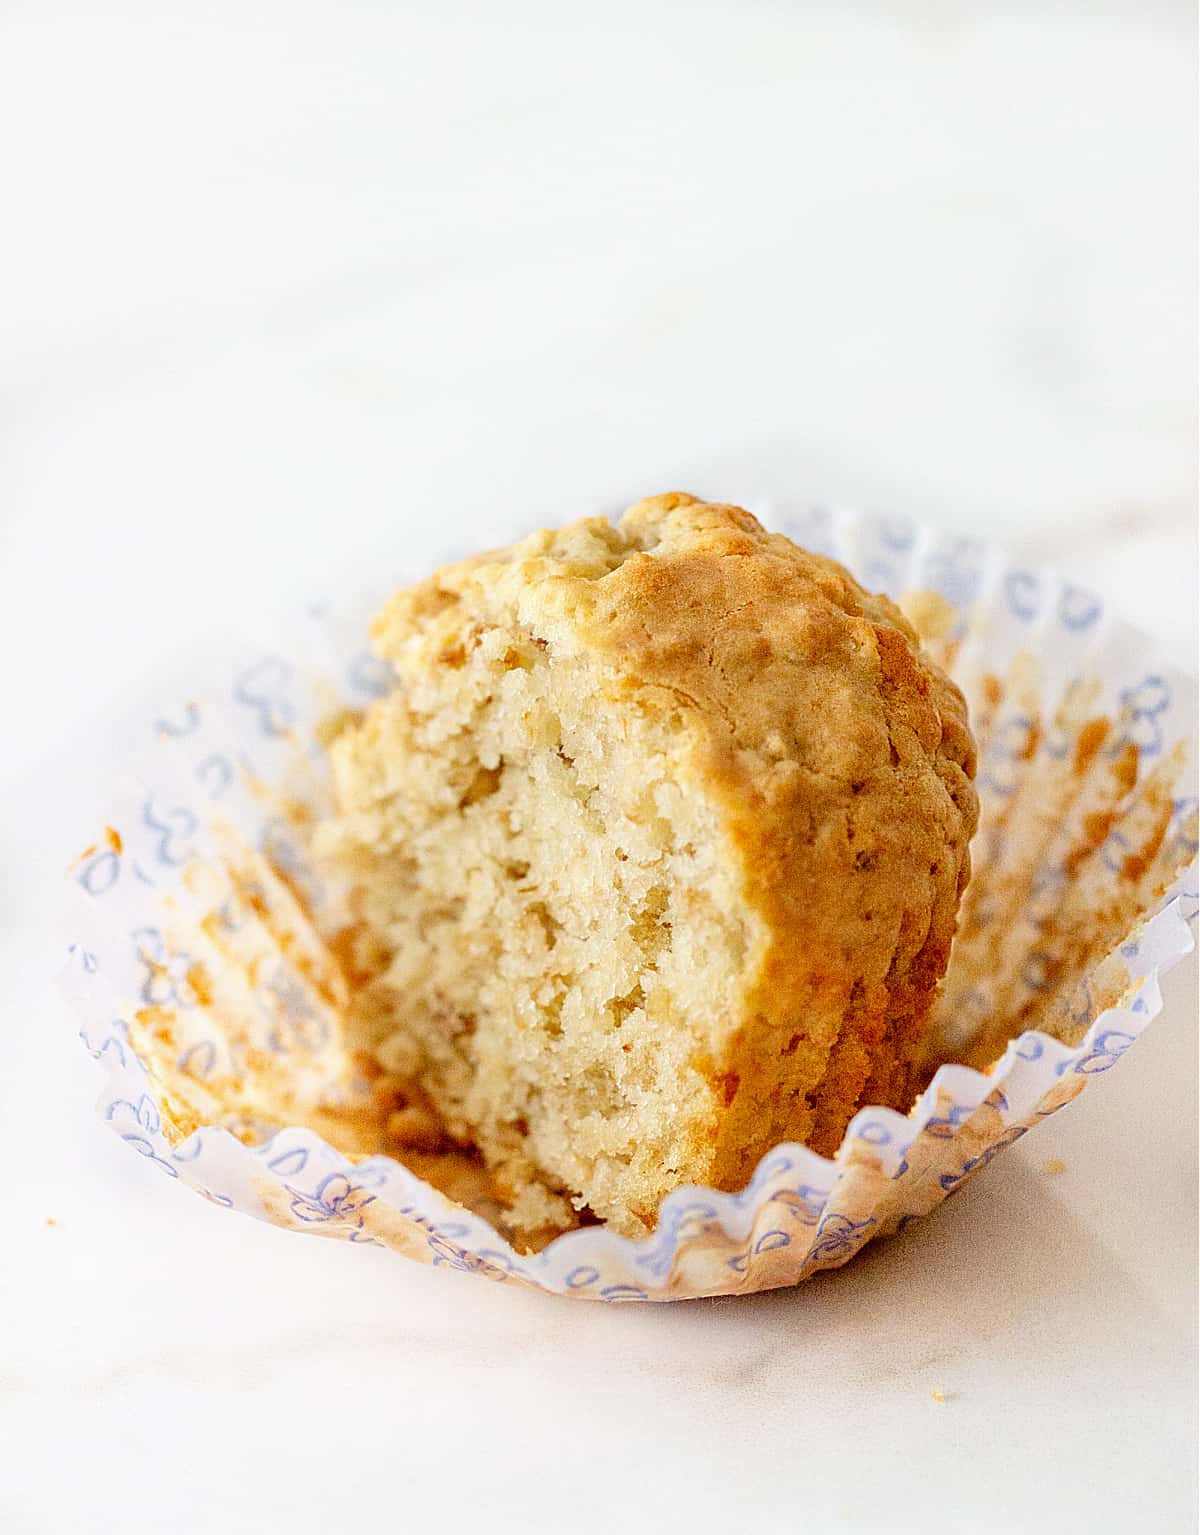 Half oatmeal muffin in light colored paper cup, white marble surface.